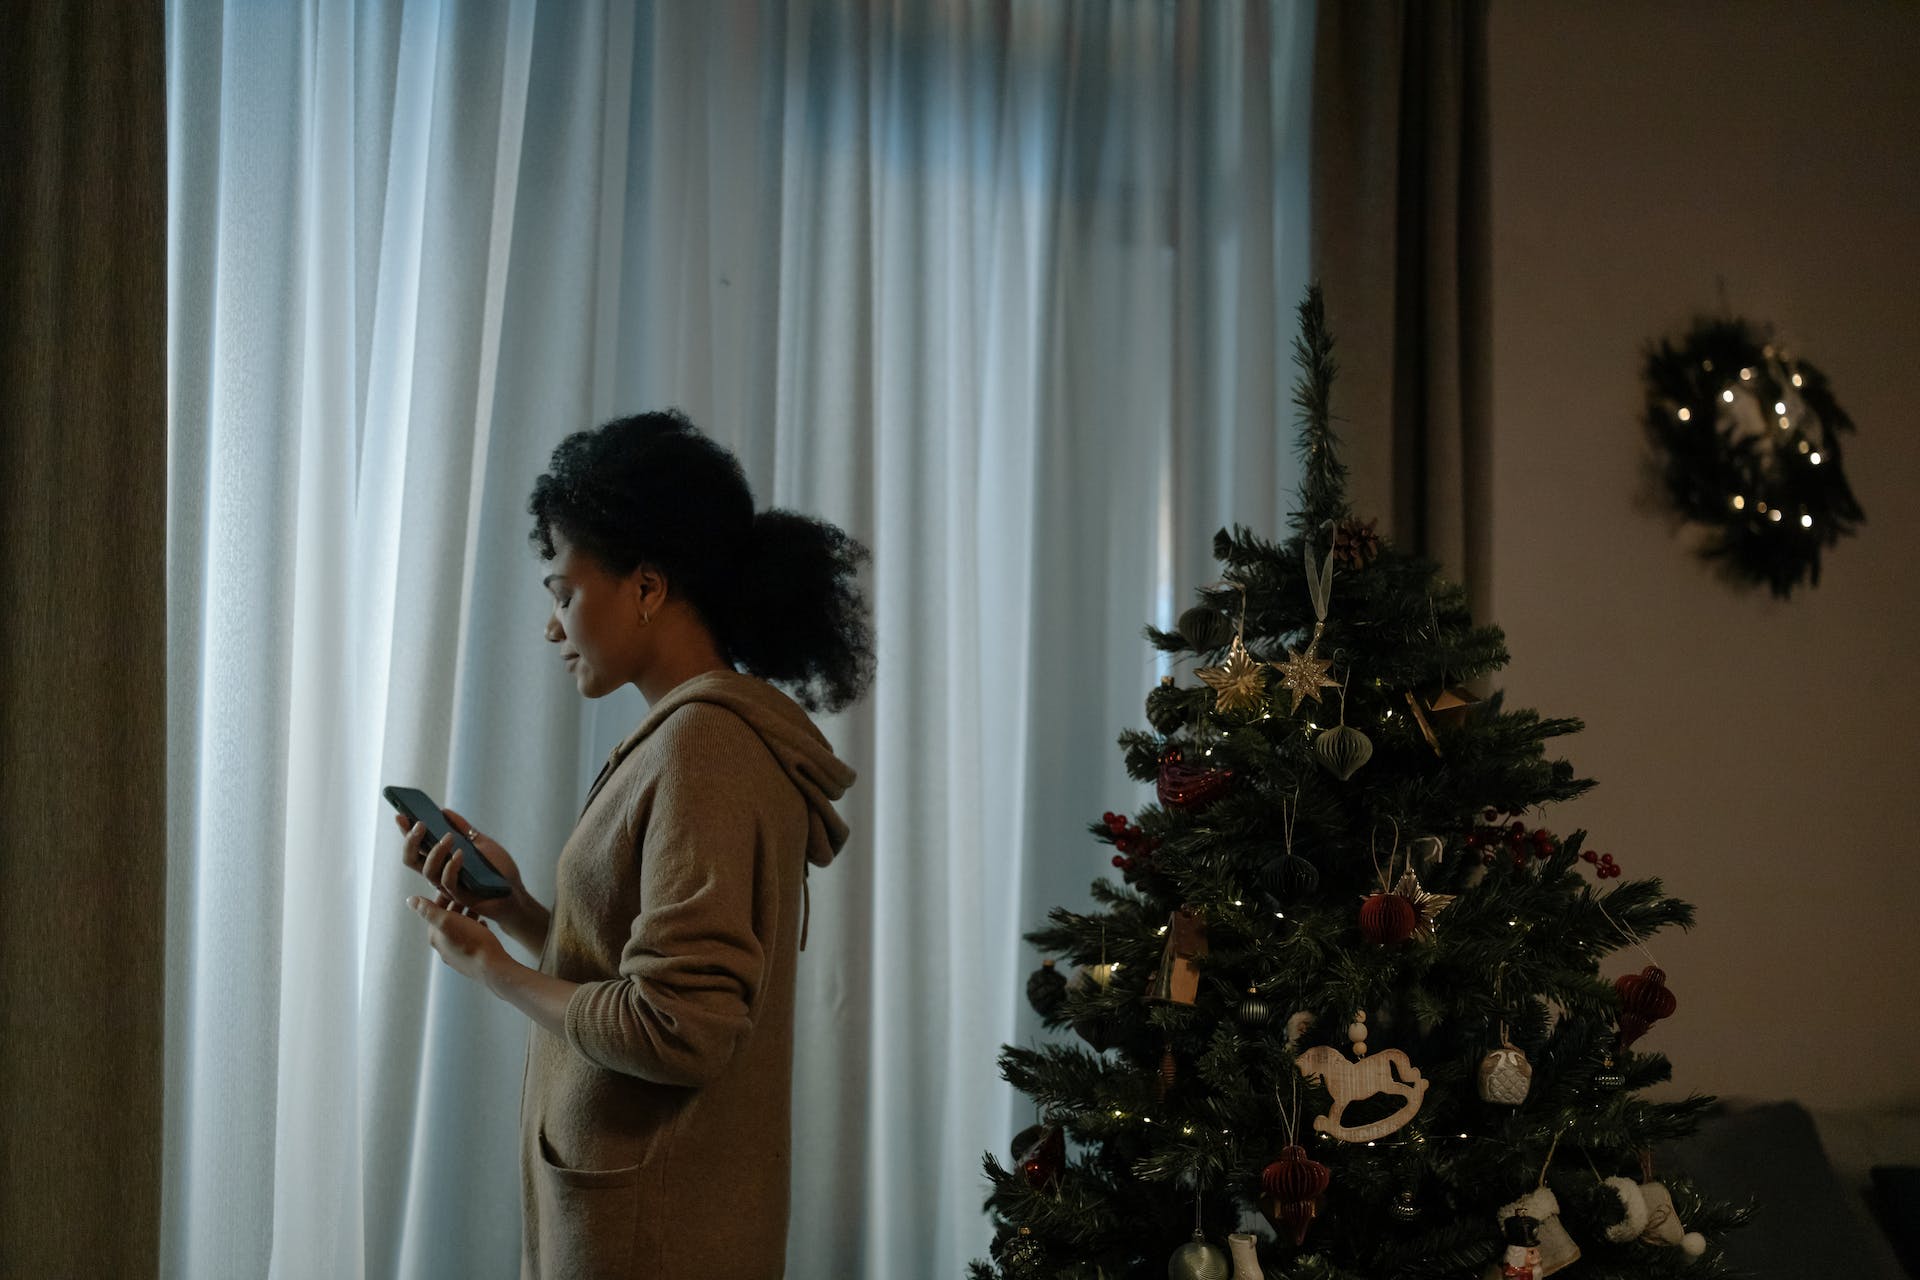 Woman with a phone standing beside a Christmas tree | Source: Pexels